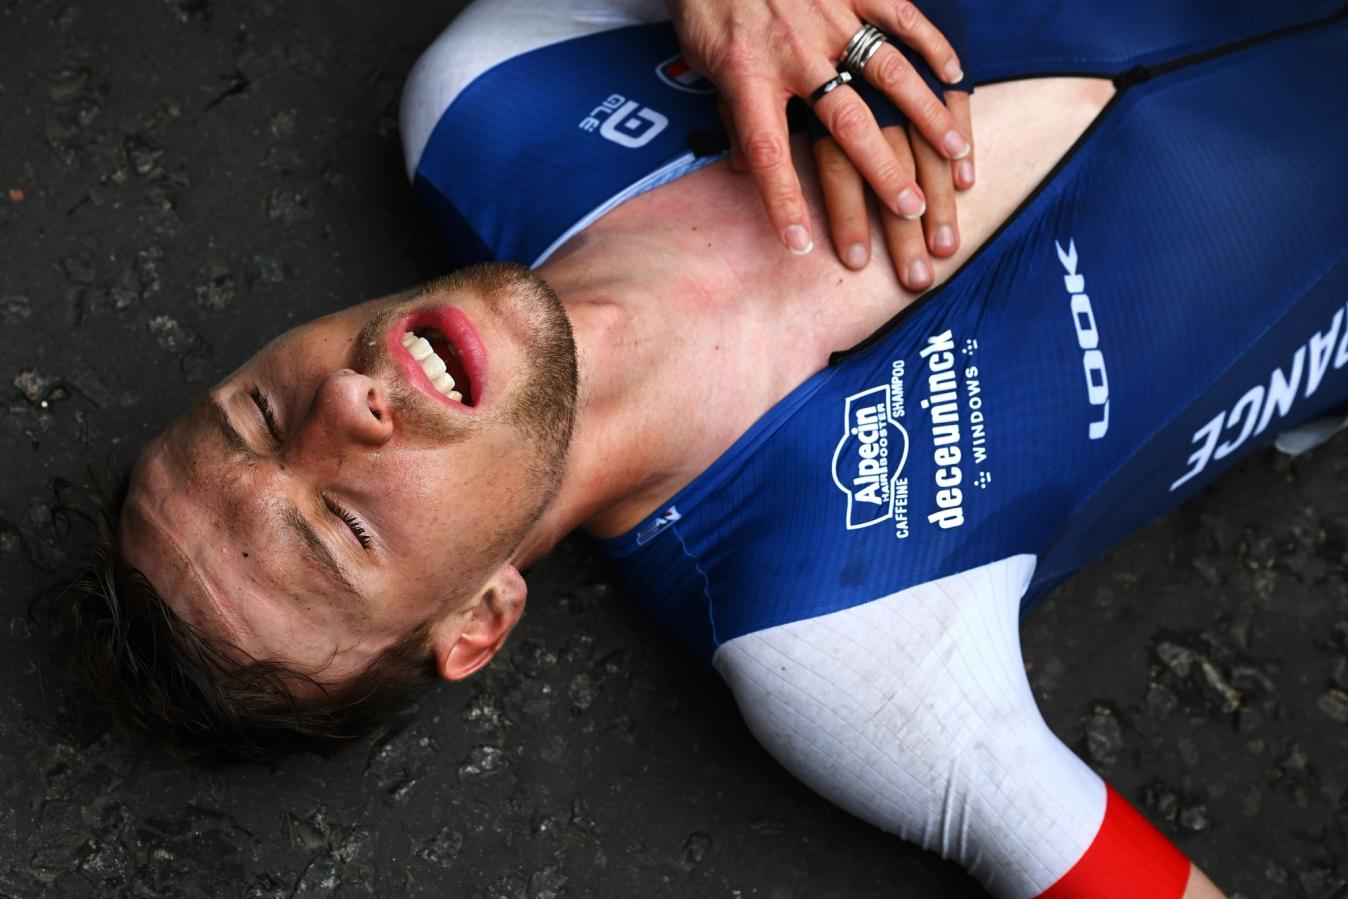 Axel Laurance gave everything he could muster to win the U23 road race at this year's World Championships